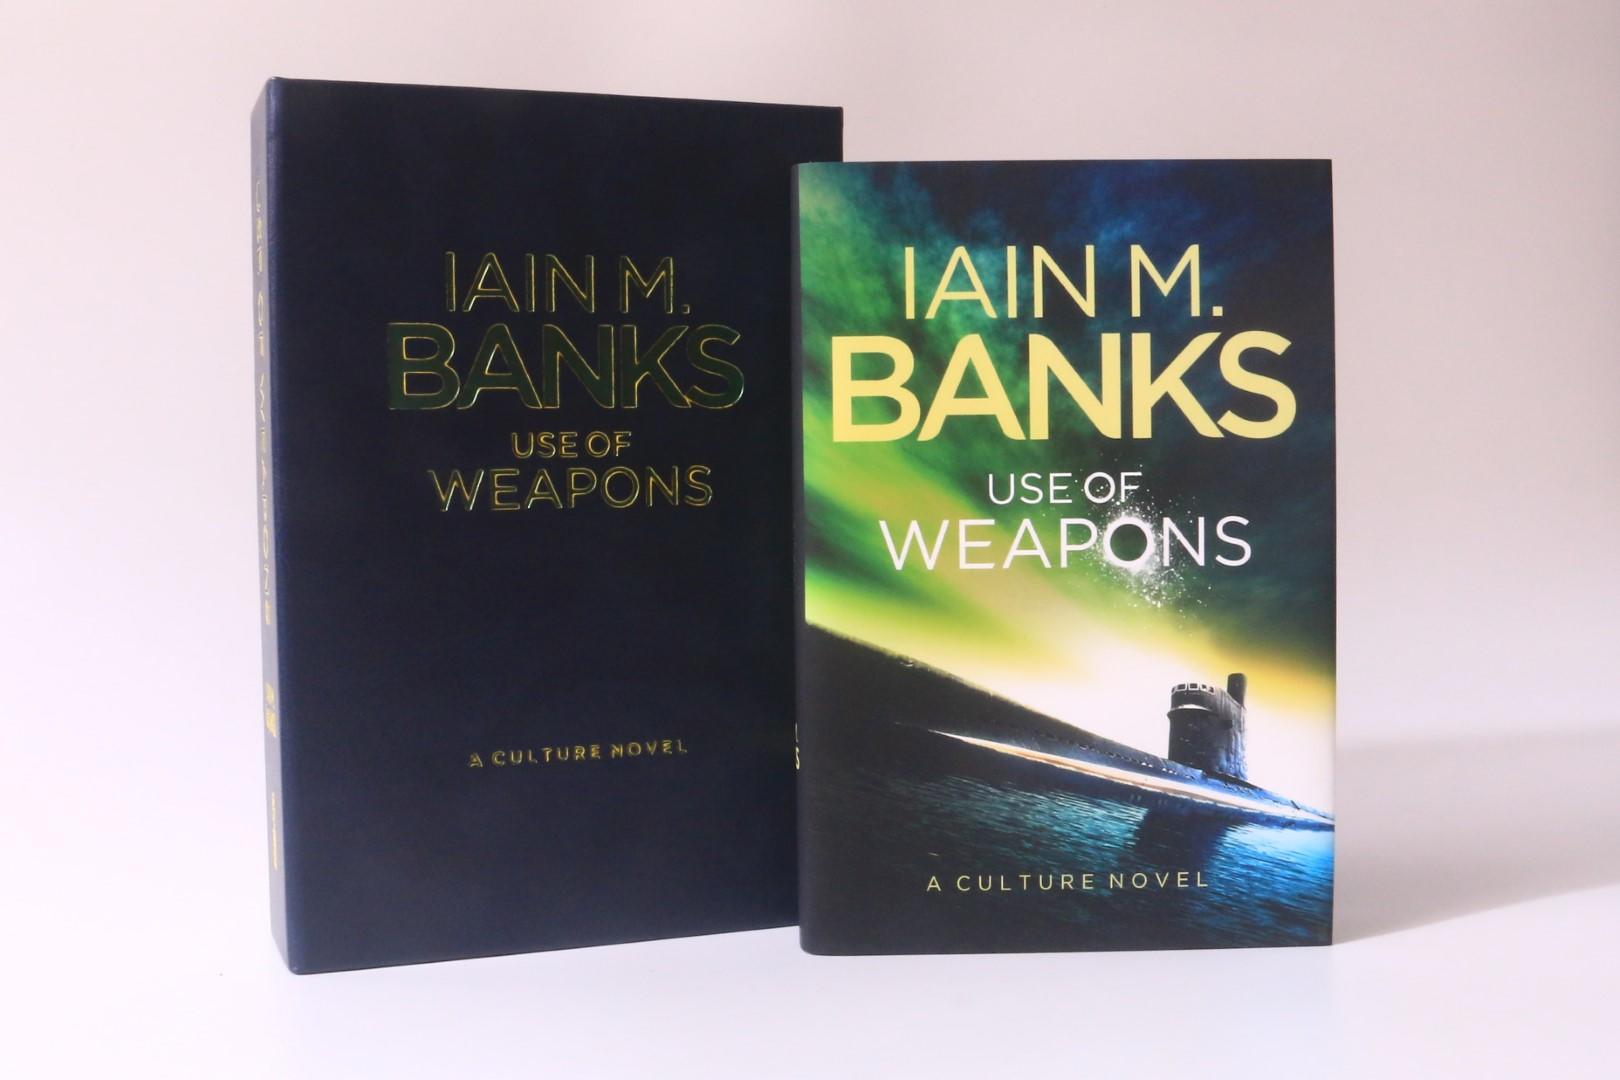 Iain M. Banks - Use of Weapons - Subterranean Press, 2020, Limited Edition.